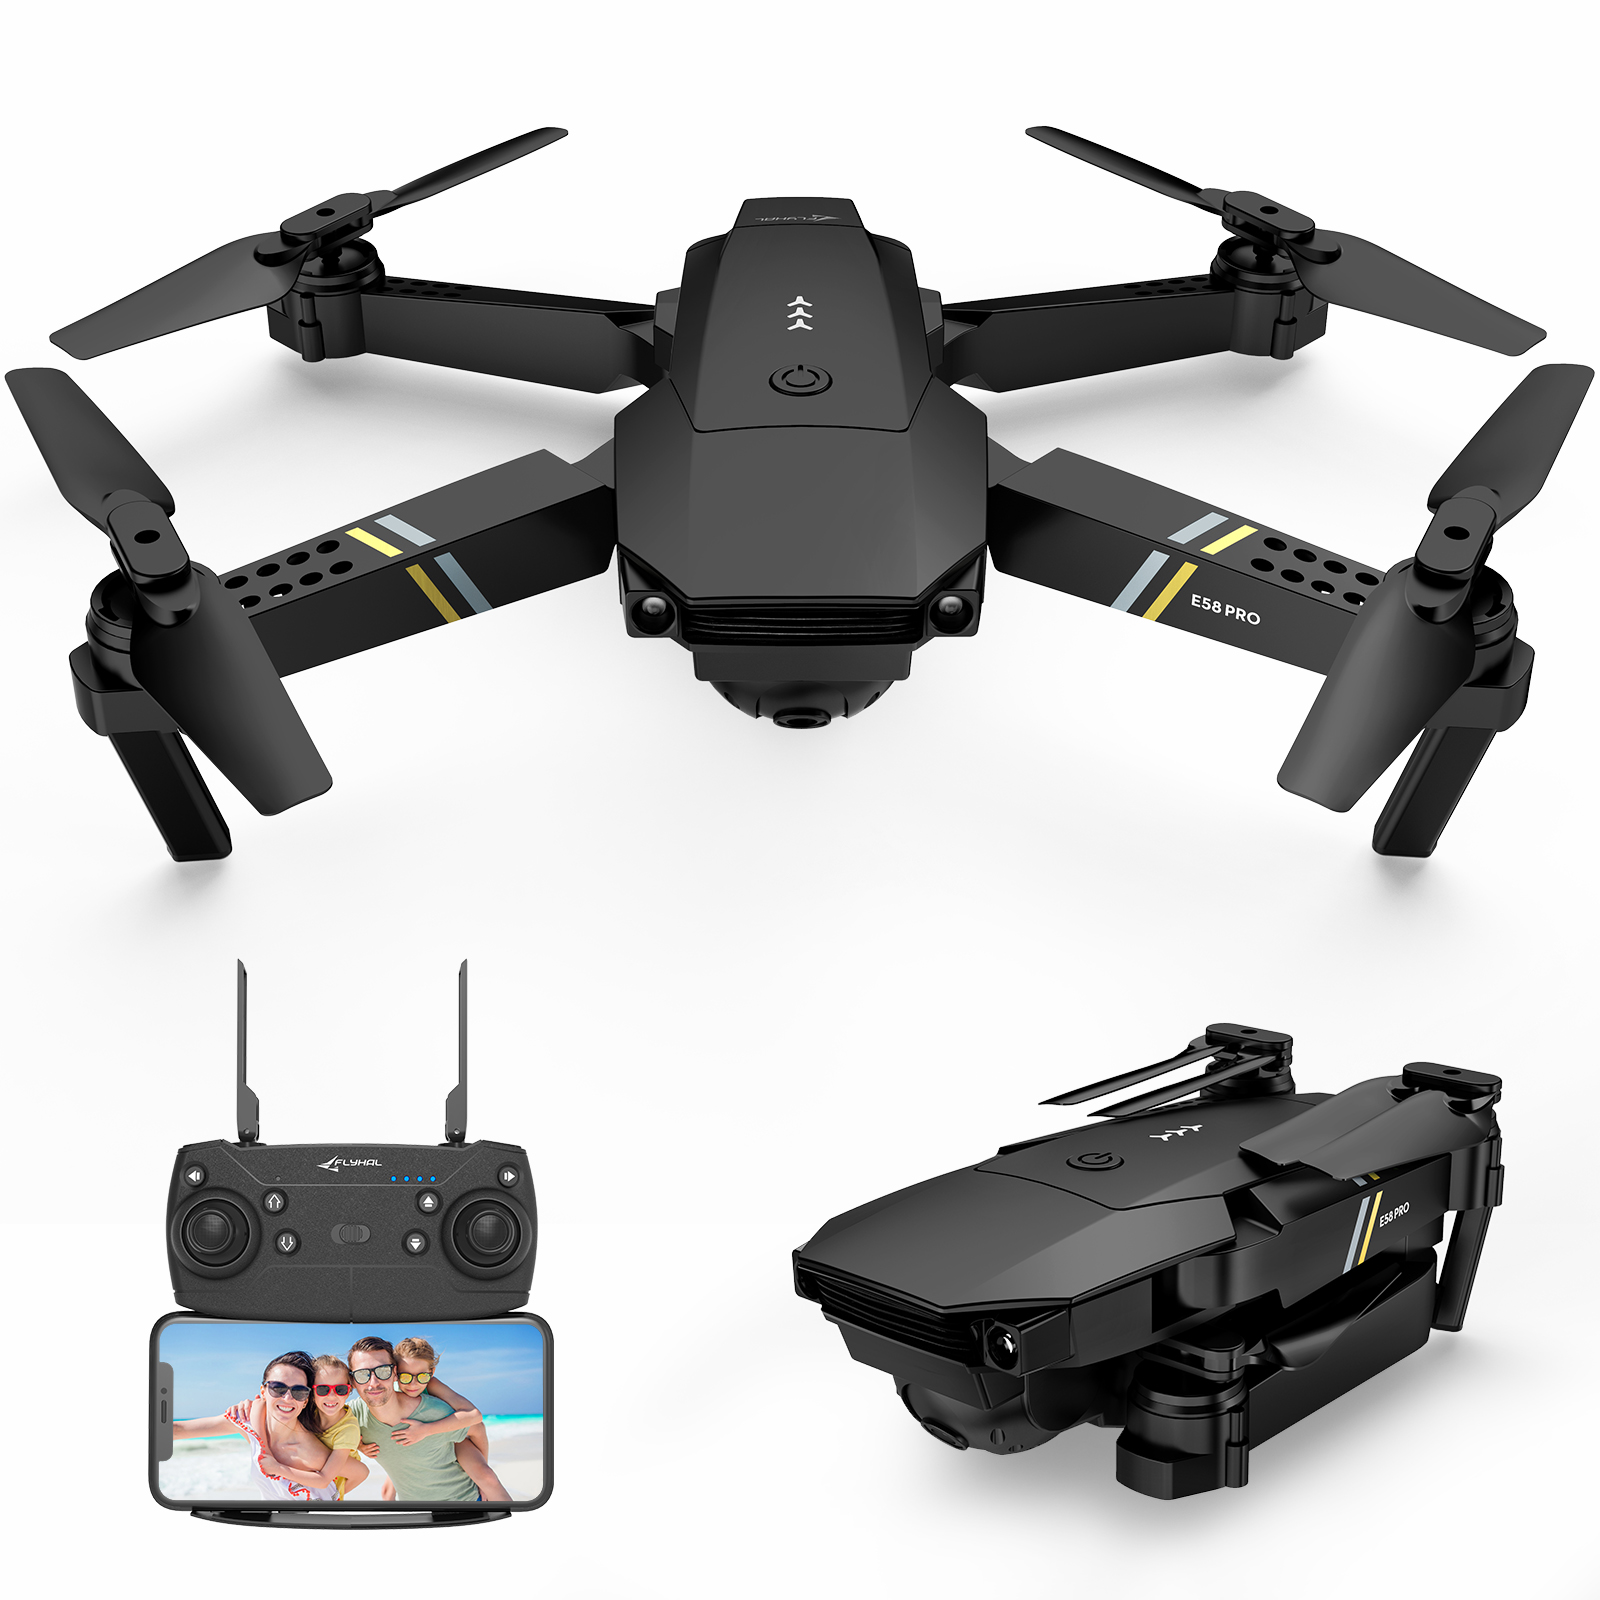 Find FLYHAL E58 PRO WIFI FPV With 120 FOV 1080P HD Camera Adjustment Angle High Hold Mode Foldable RC Drone Quadcopter RTF for Sale on Gipsybee.com with cryptocurrencies